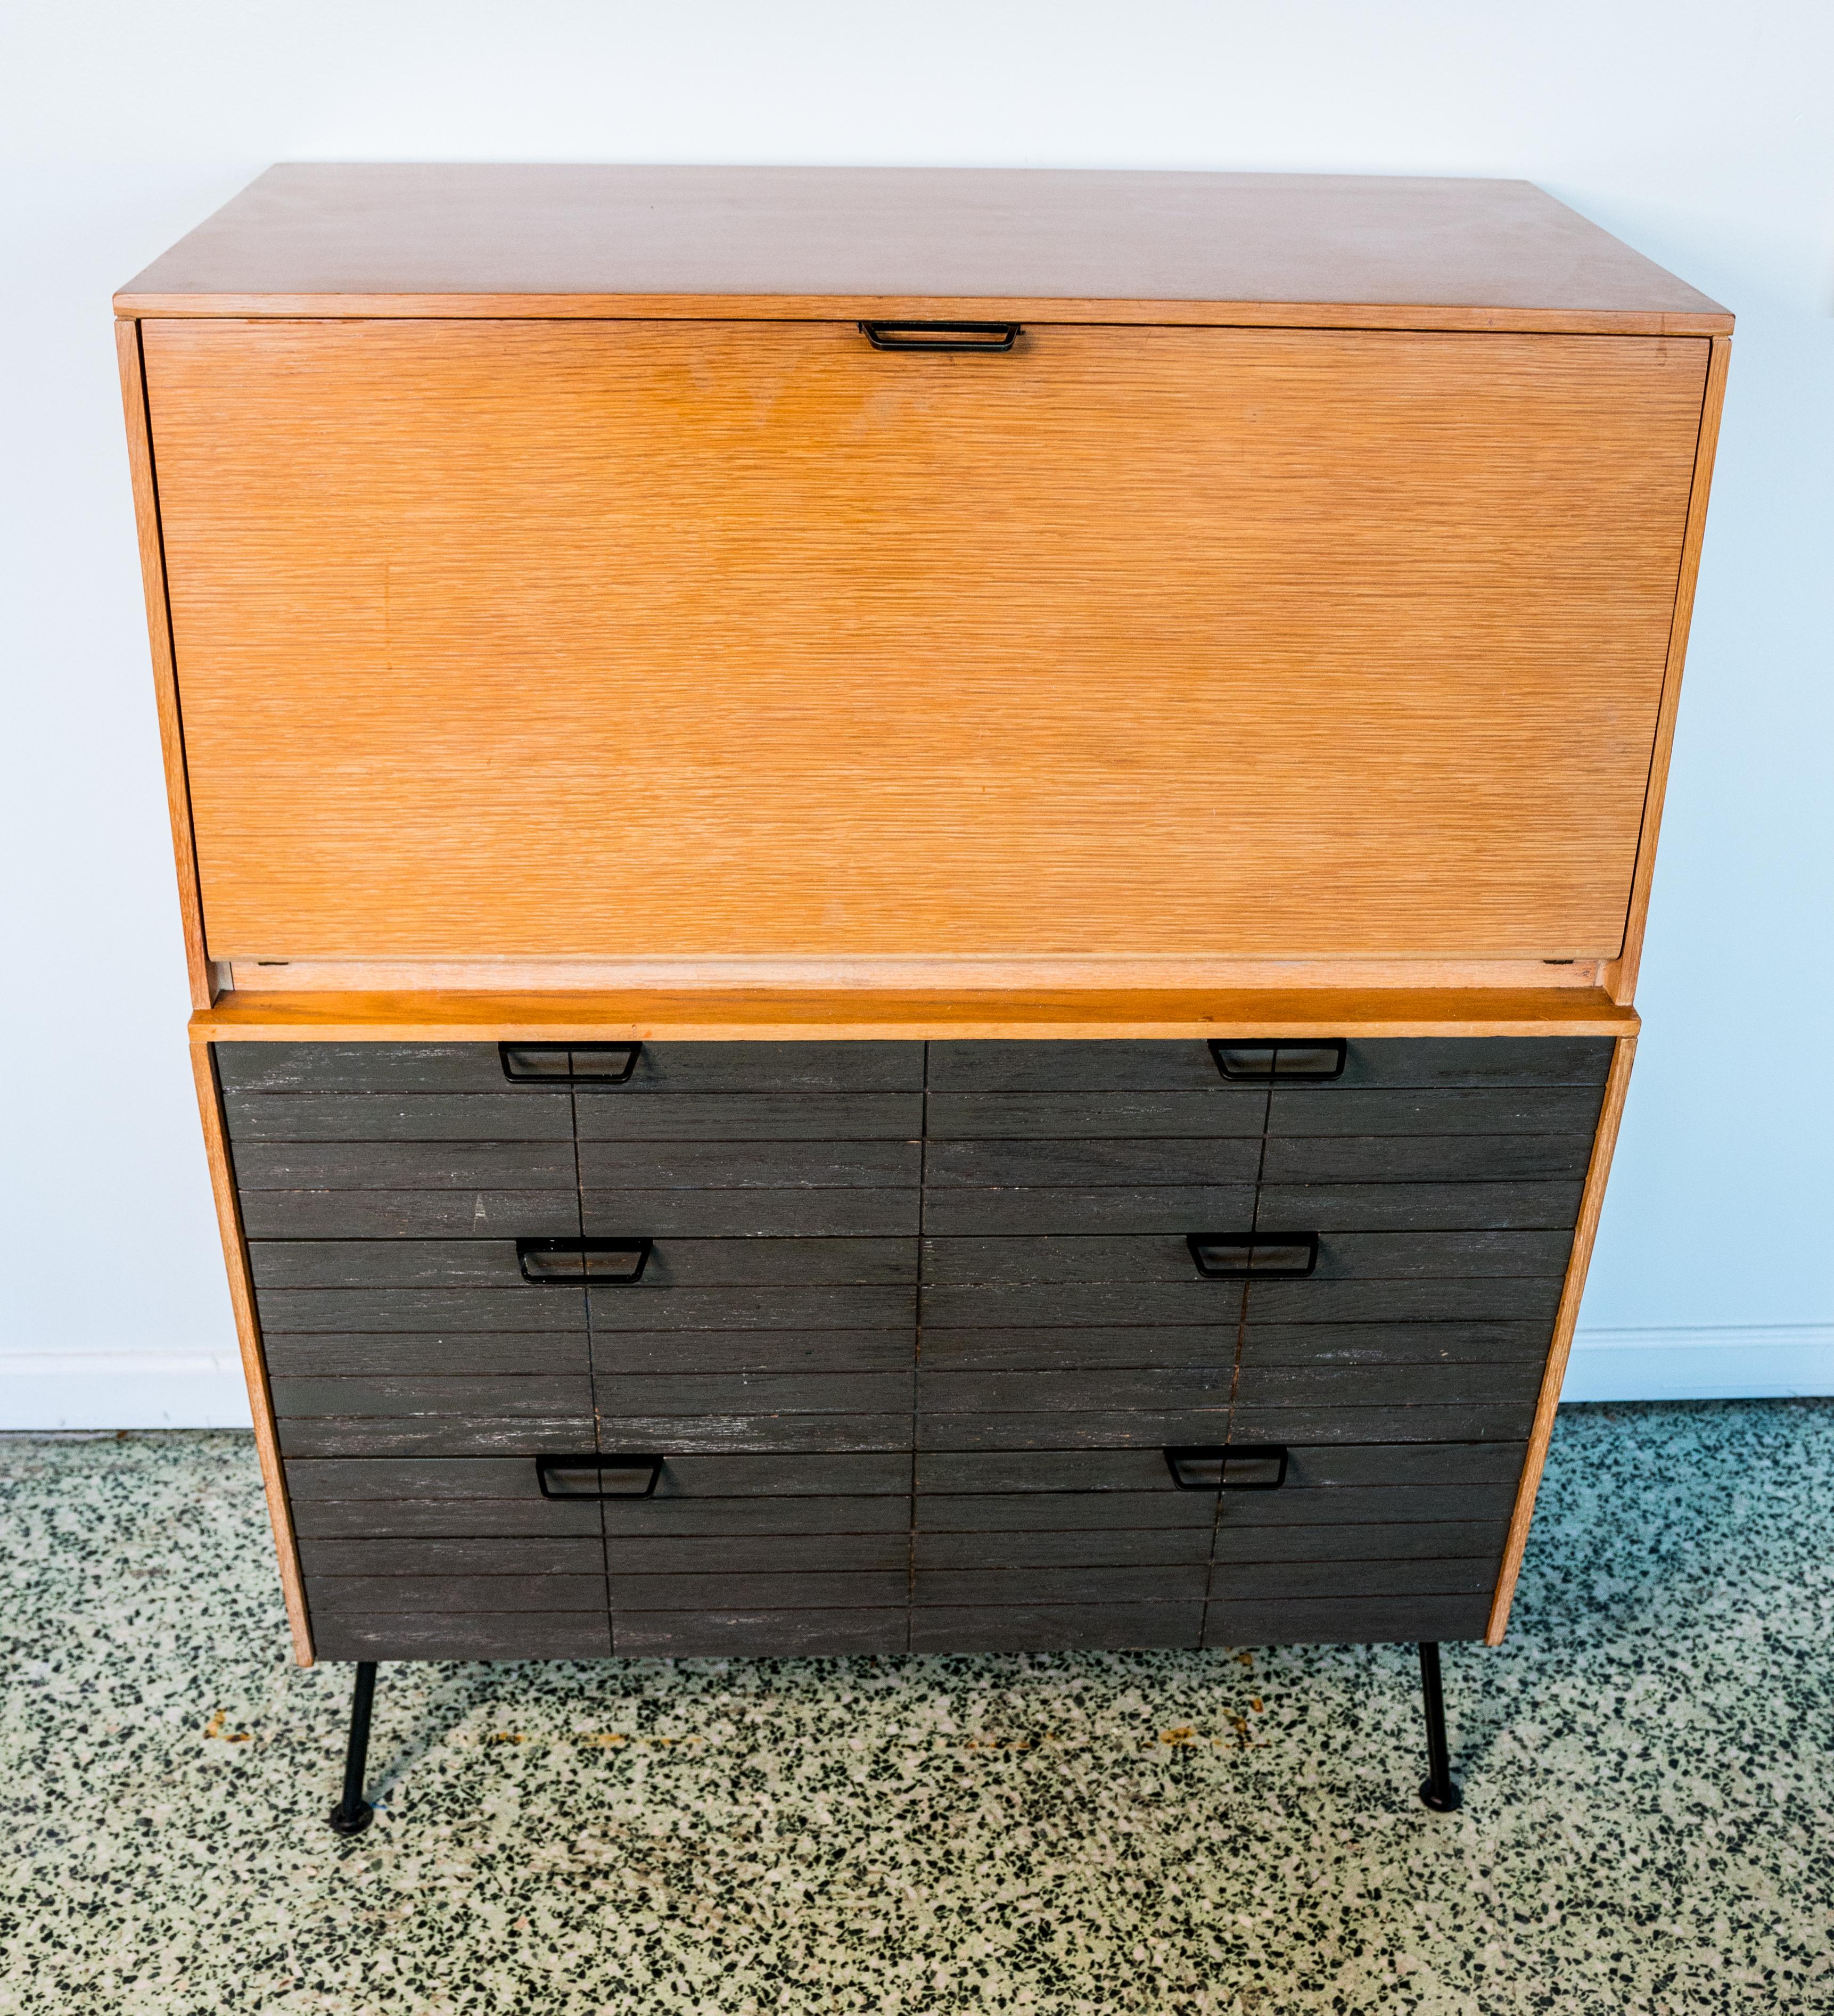 Designer: Raymond Loewy
Manufacture: Mengel
Period/style: Mid-Century Modern 
Country: US 
Date: 1960s.